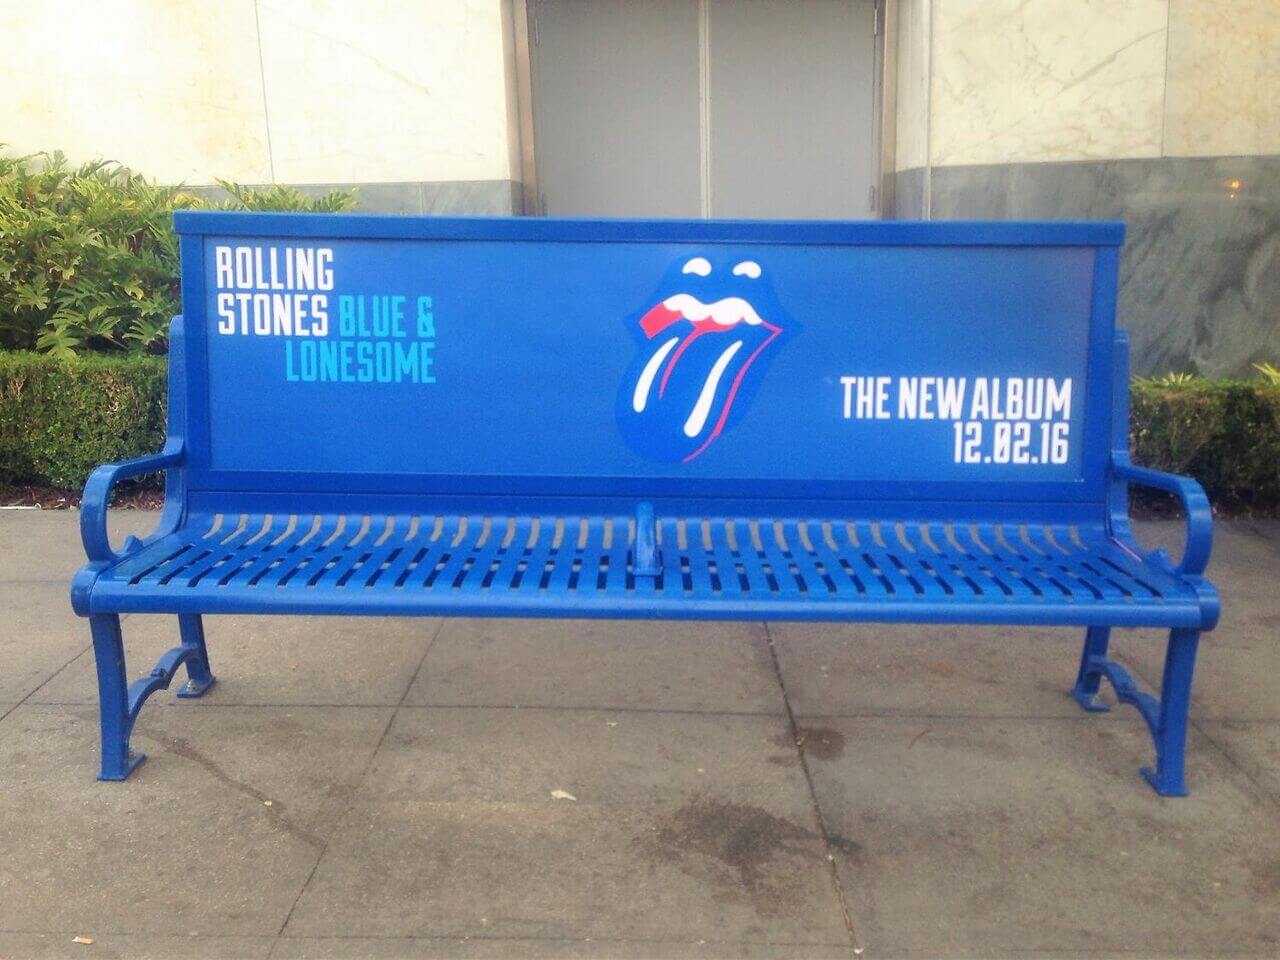 The Rolling Stones Bus Bench Ad